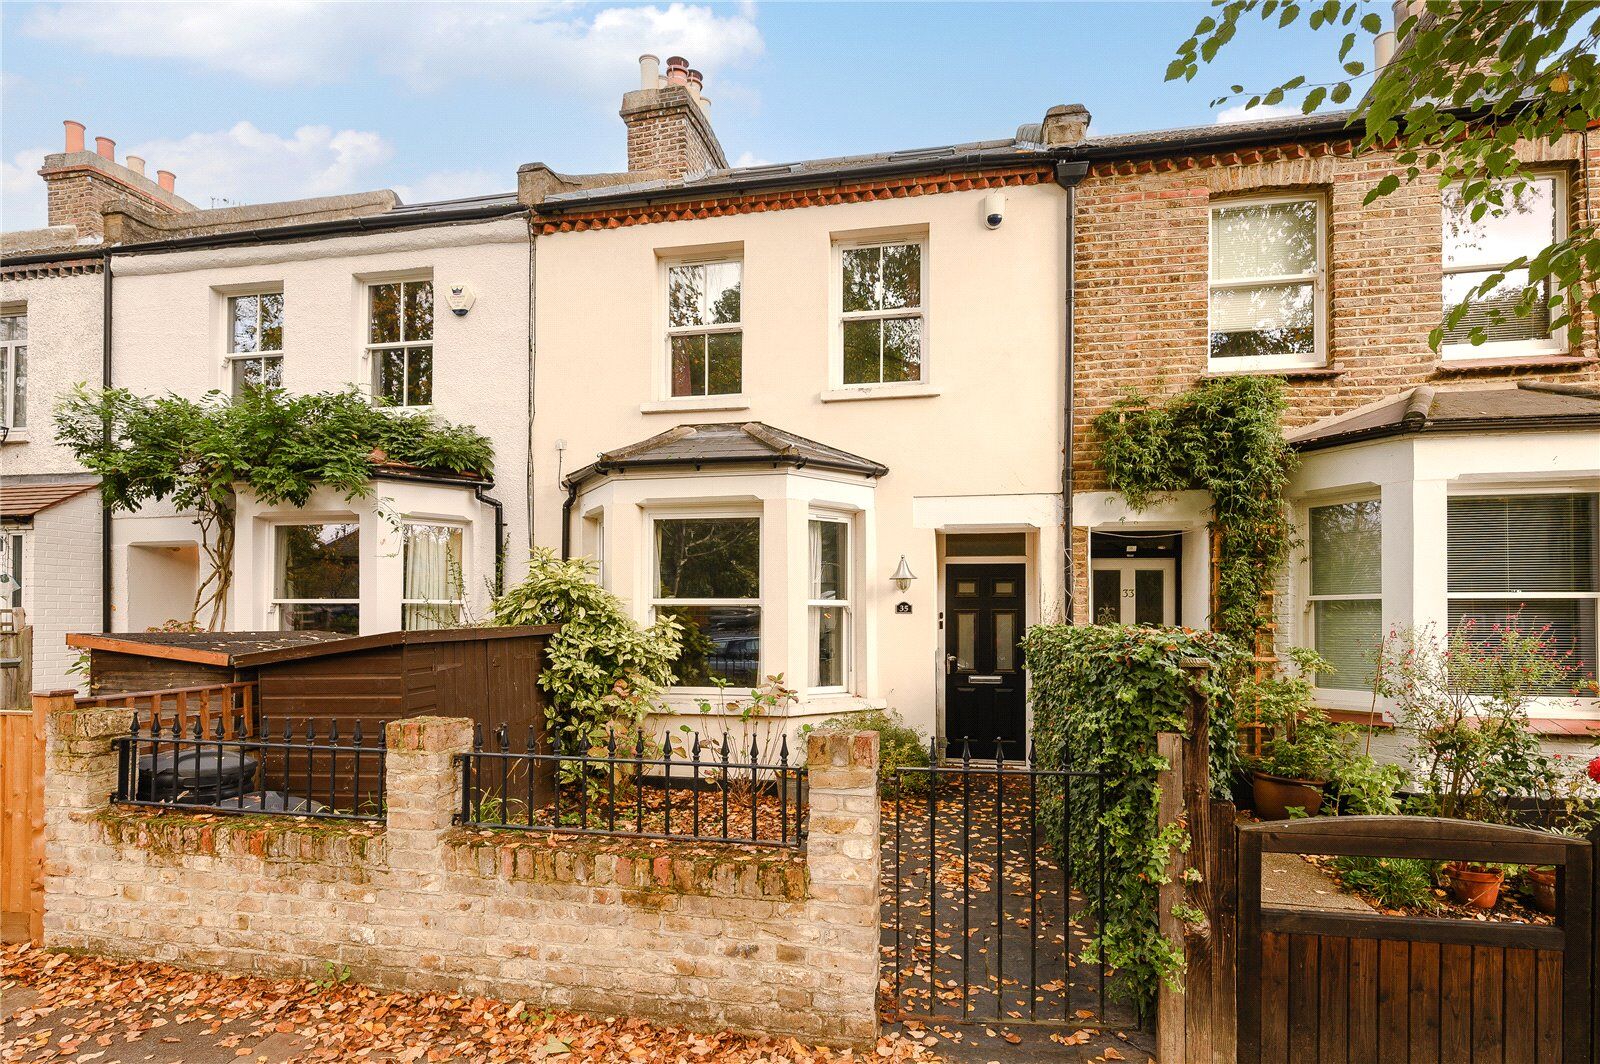 4 bedroom mid terraced house for sale Kingswood Road, London, SW19, main image